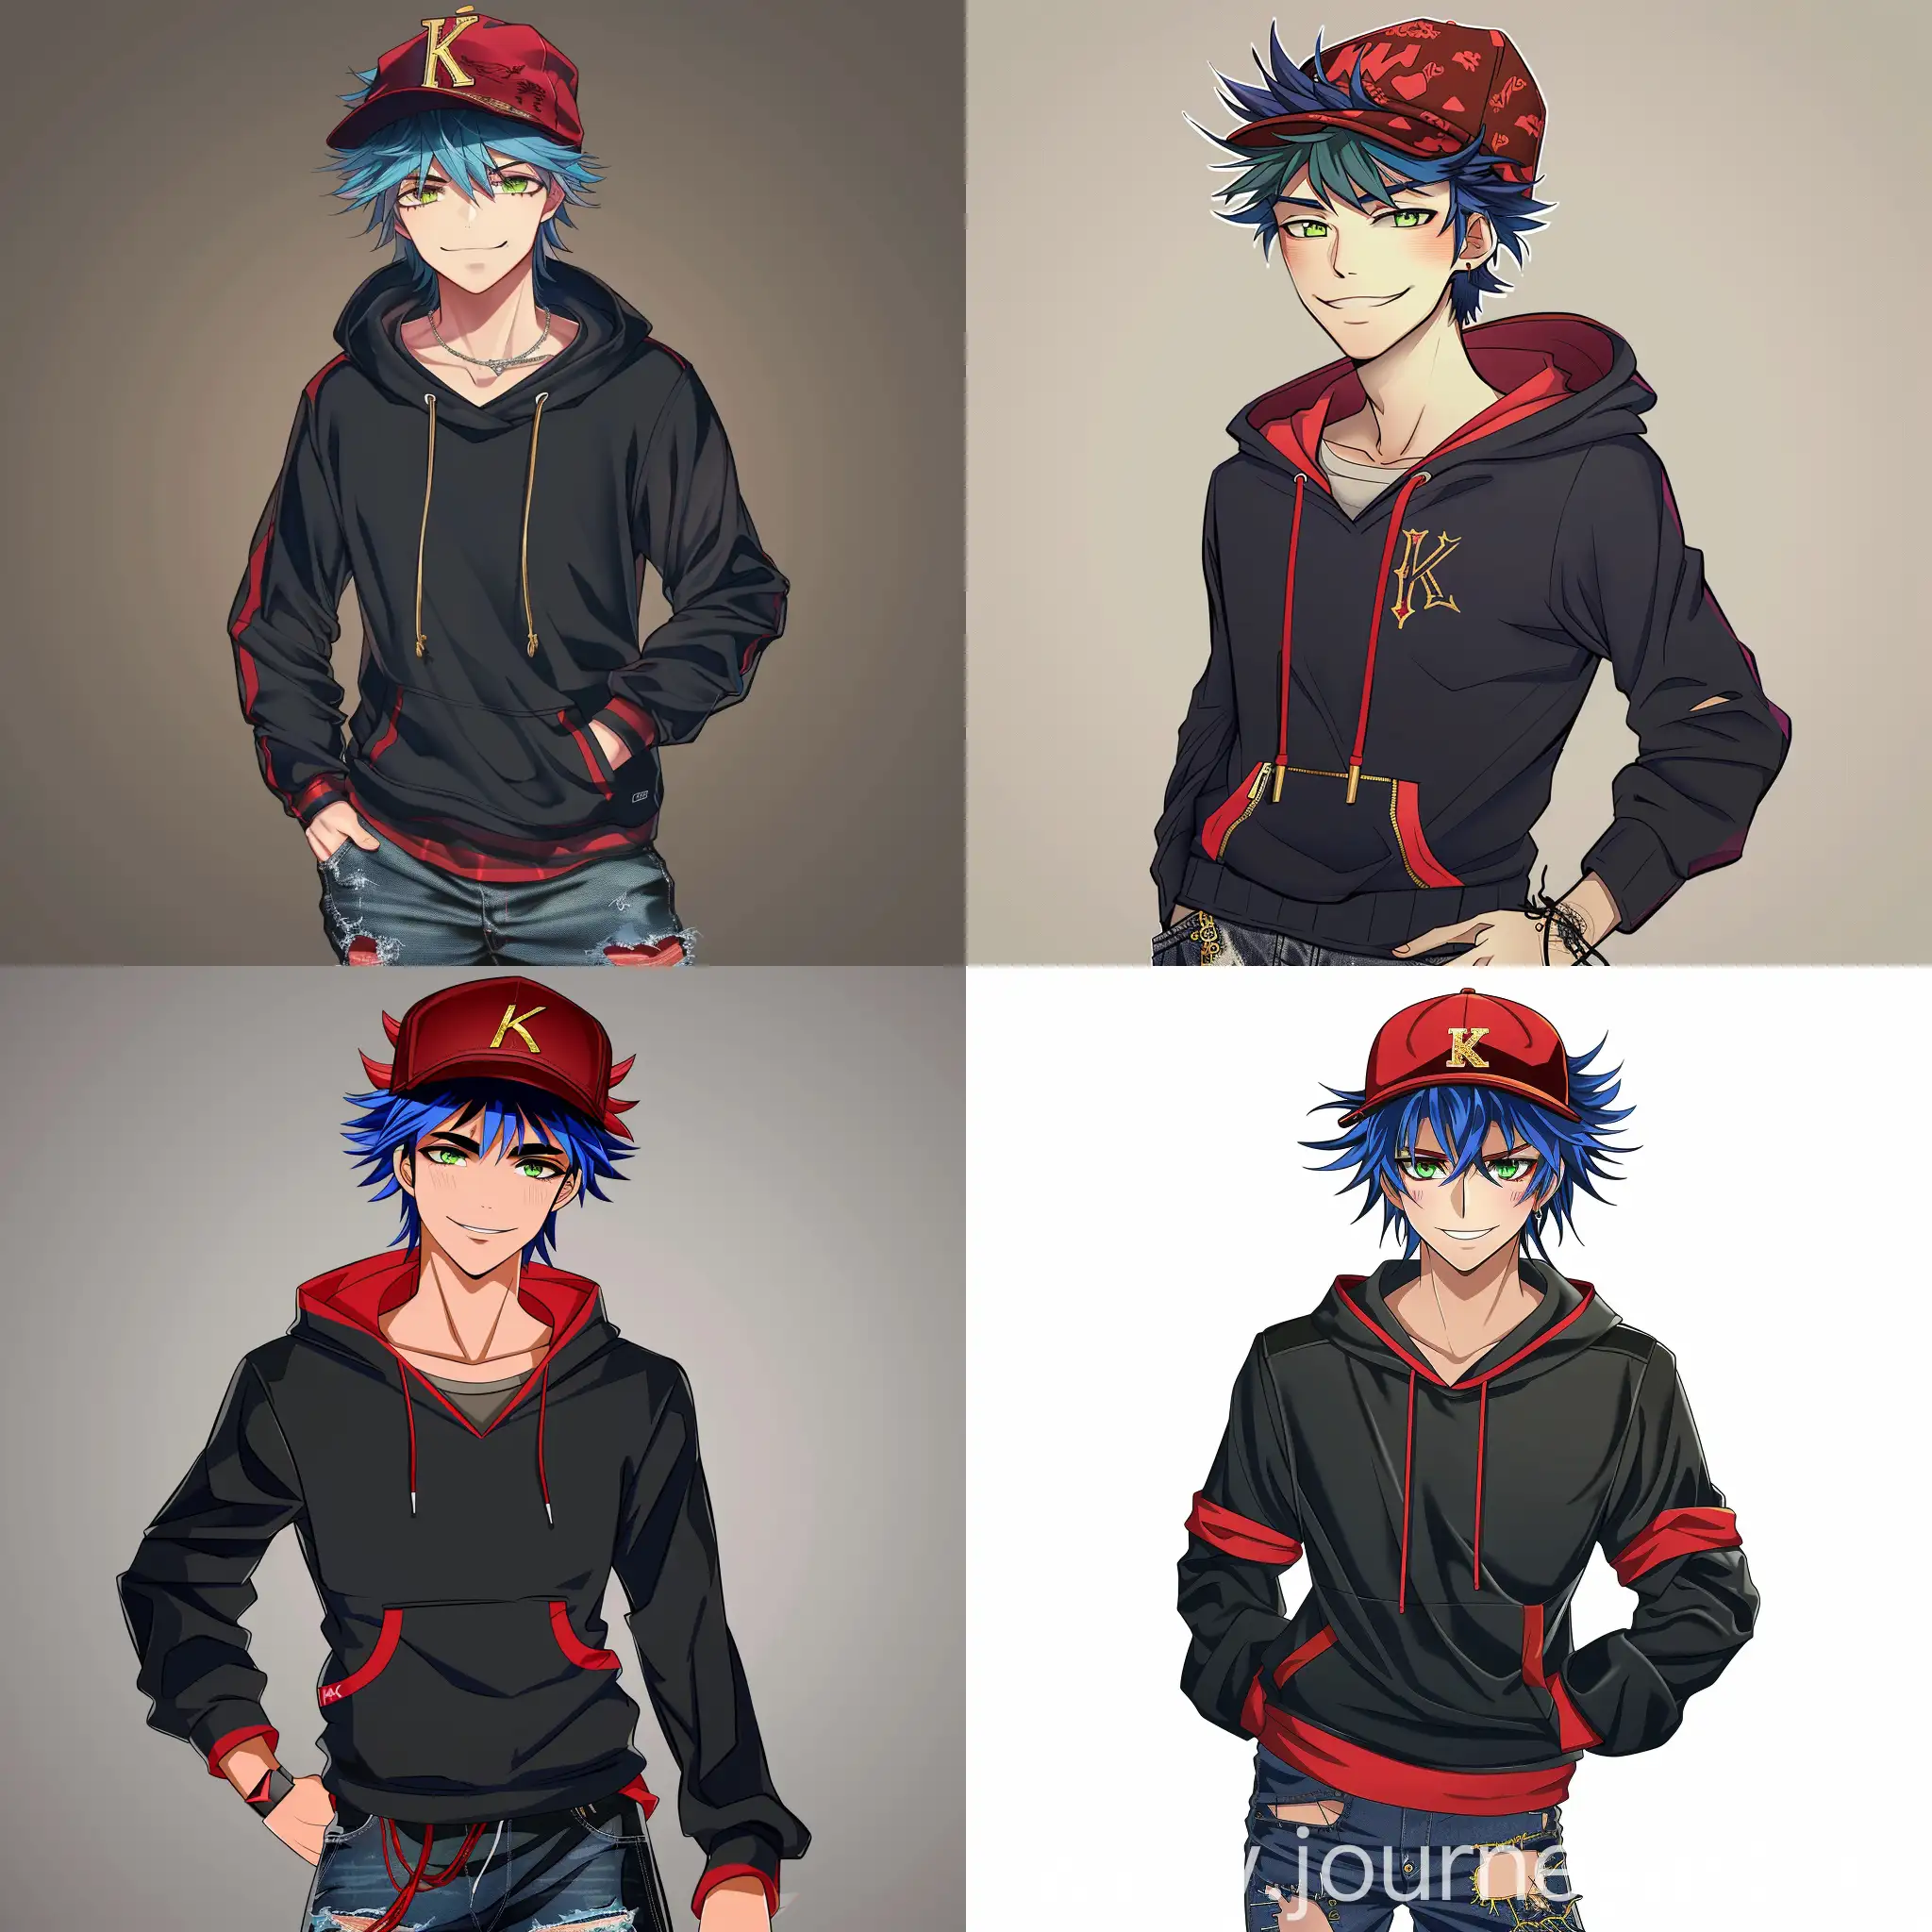 The 21-year-old anime guy has spiky blue hair and piercing green eyes. He is wearing a black hoodie with a red trim, and a pair of distressed jeans. His cap is a vibrant red color with the letter "K" elegantly embroidered in gold thread. He has a confident smirk on his face, exuding a cool and laid-back vibe.